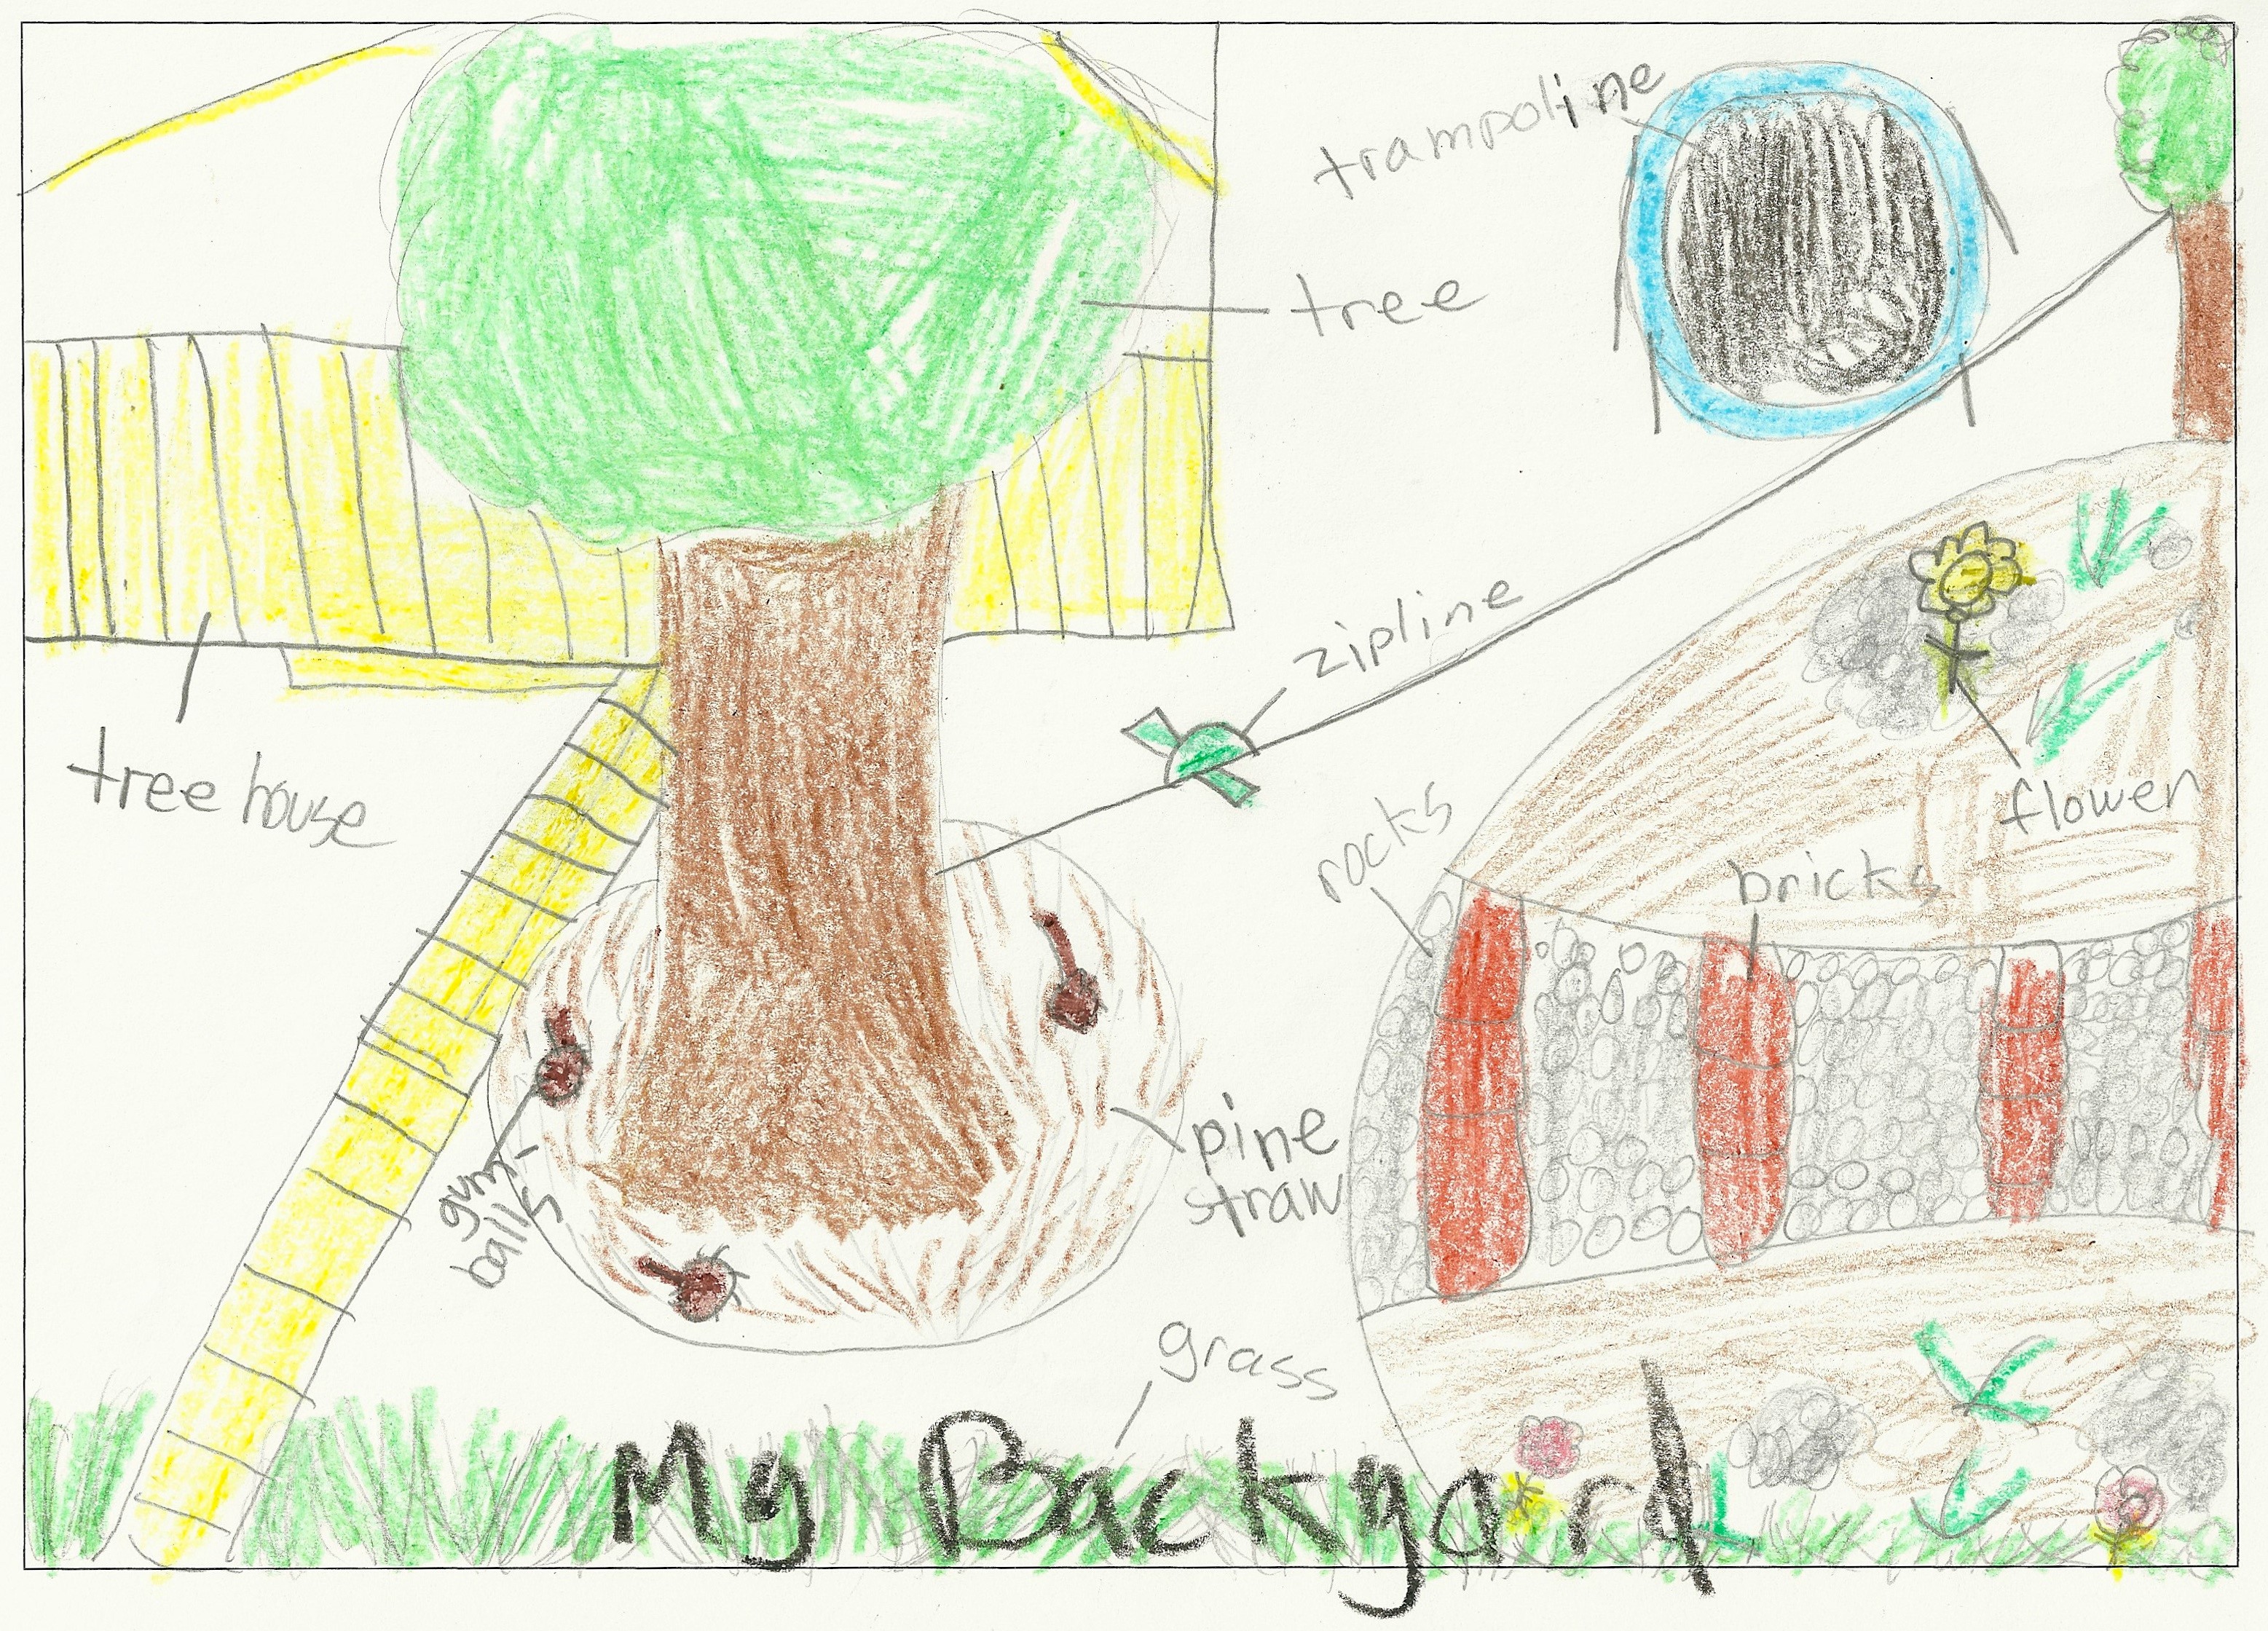 Drawn backyard ecosystem - The Larson Lab @ NCSU - College of Natural Resources at NC State University